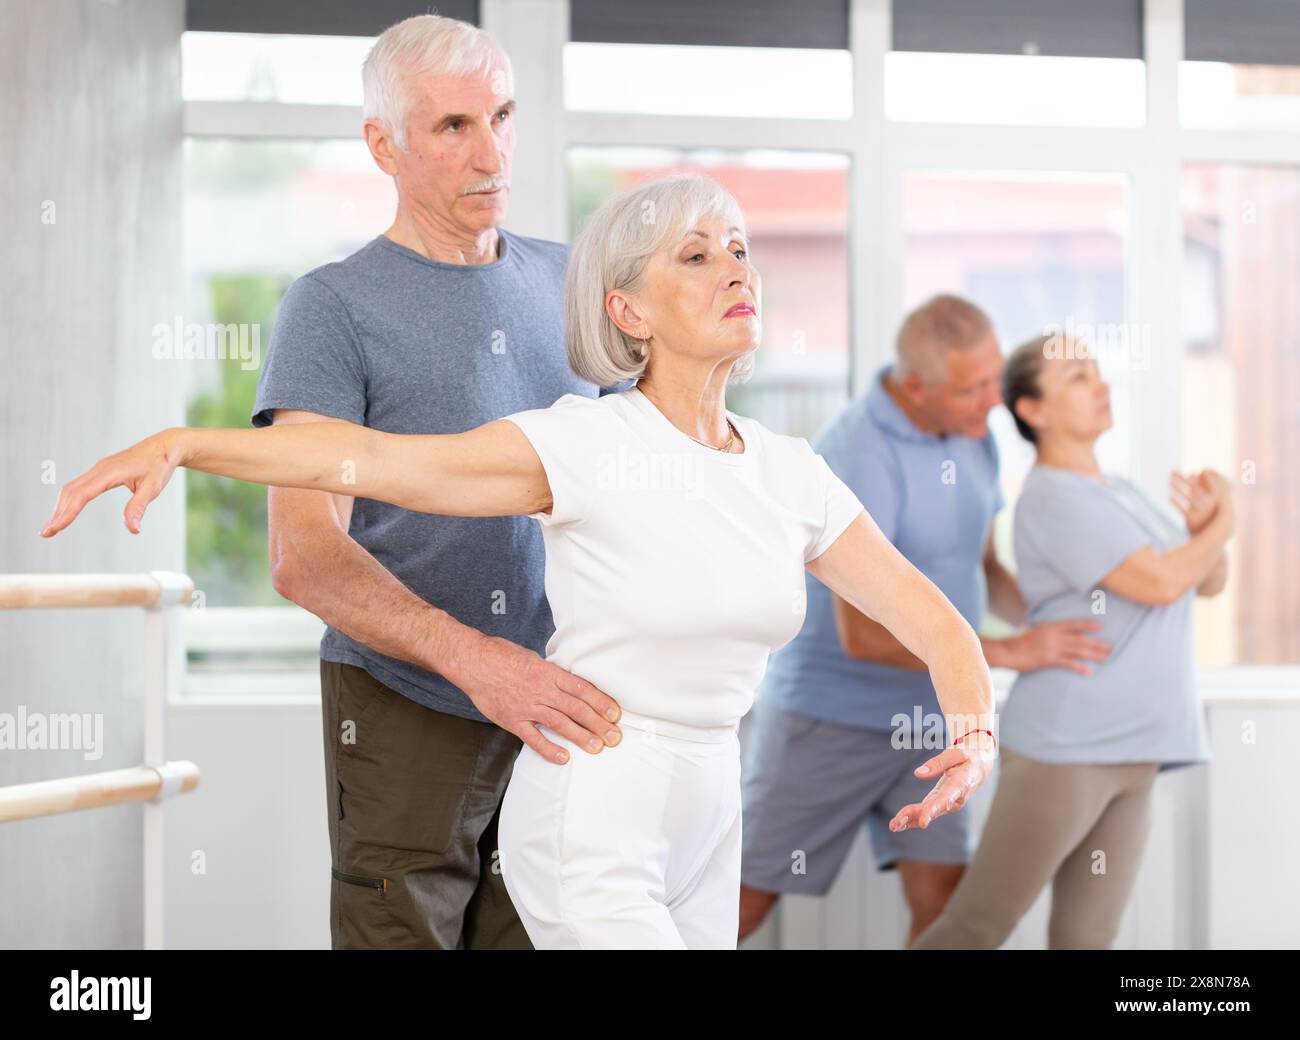 Elderly pairs dancers exercising various ballet moves during training with group of sporty people in training room Stock Photo